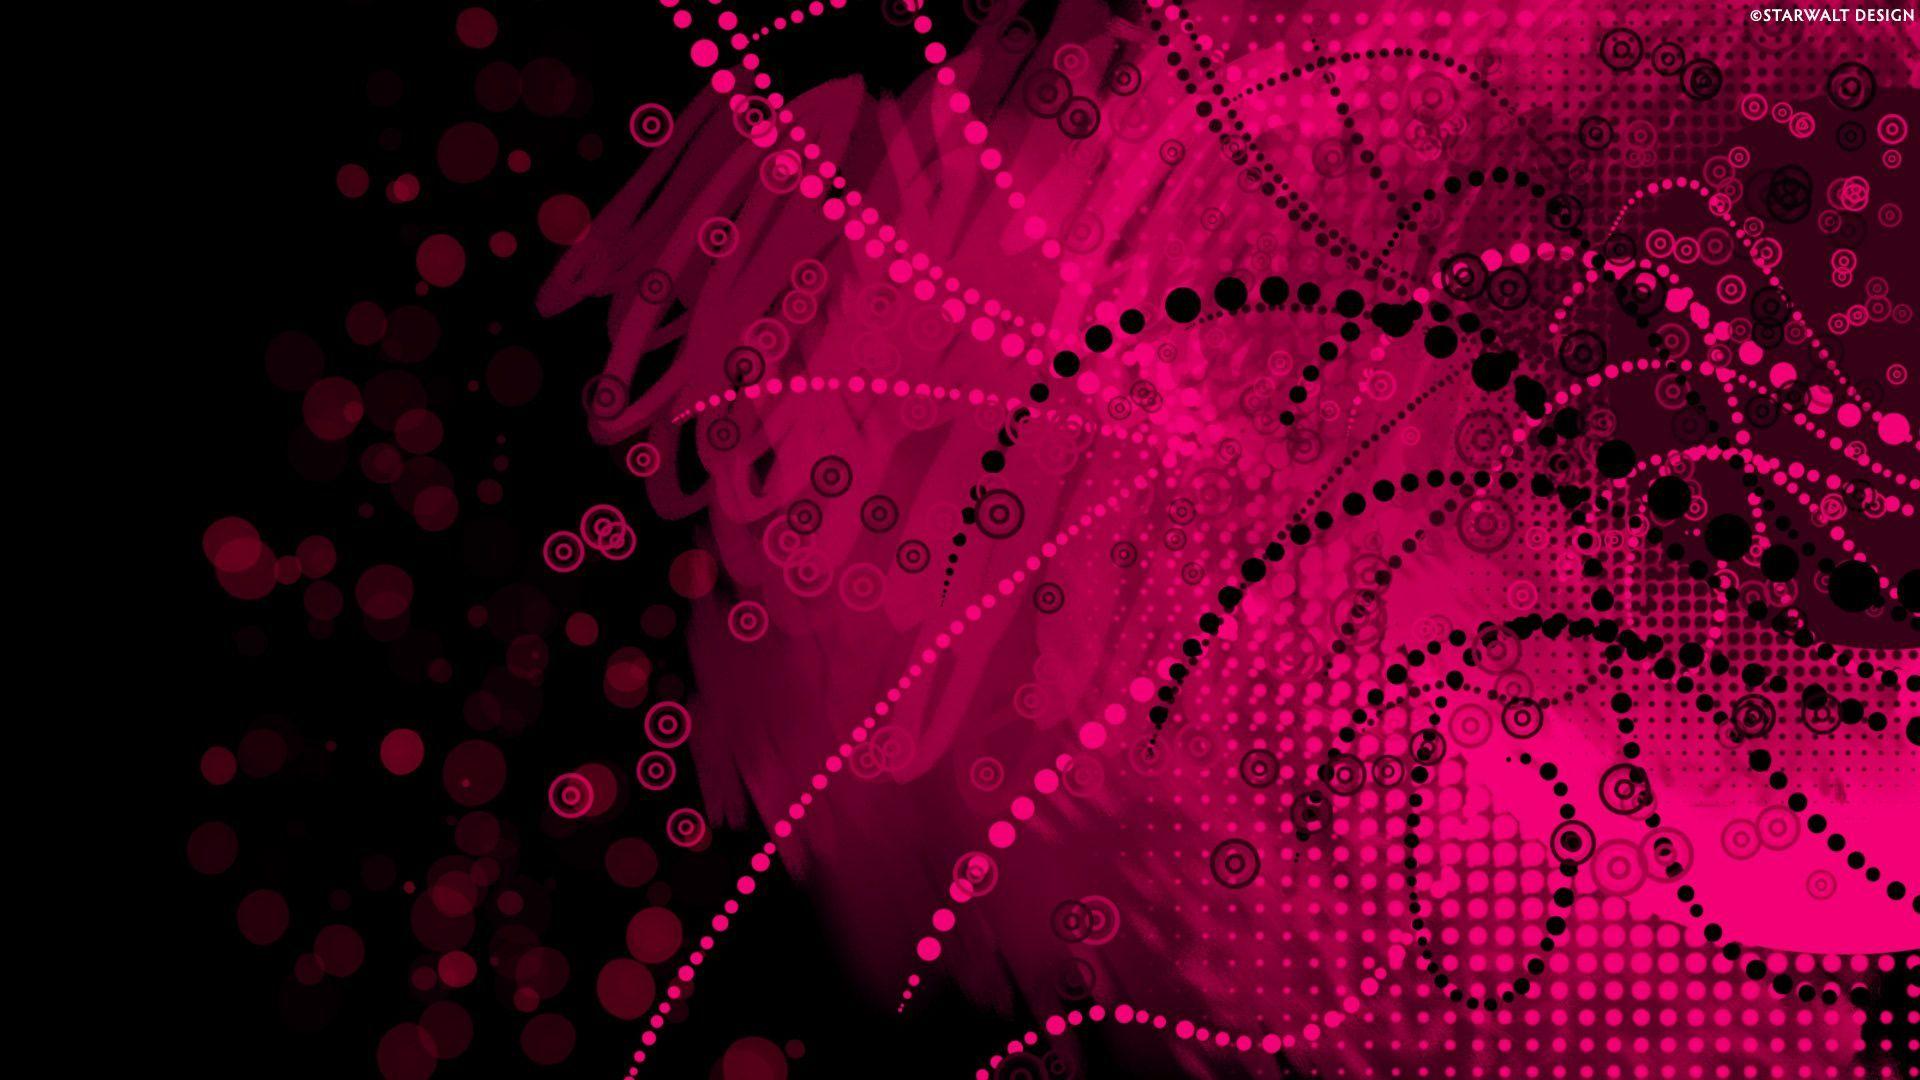 Find out: Pink Abstract Designs wallpaper